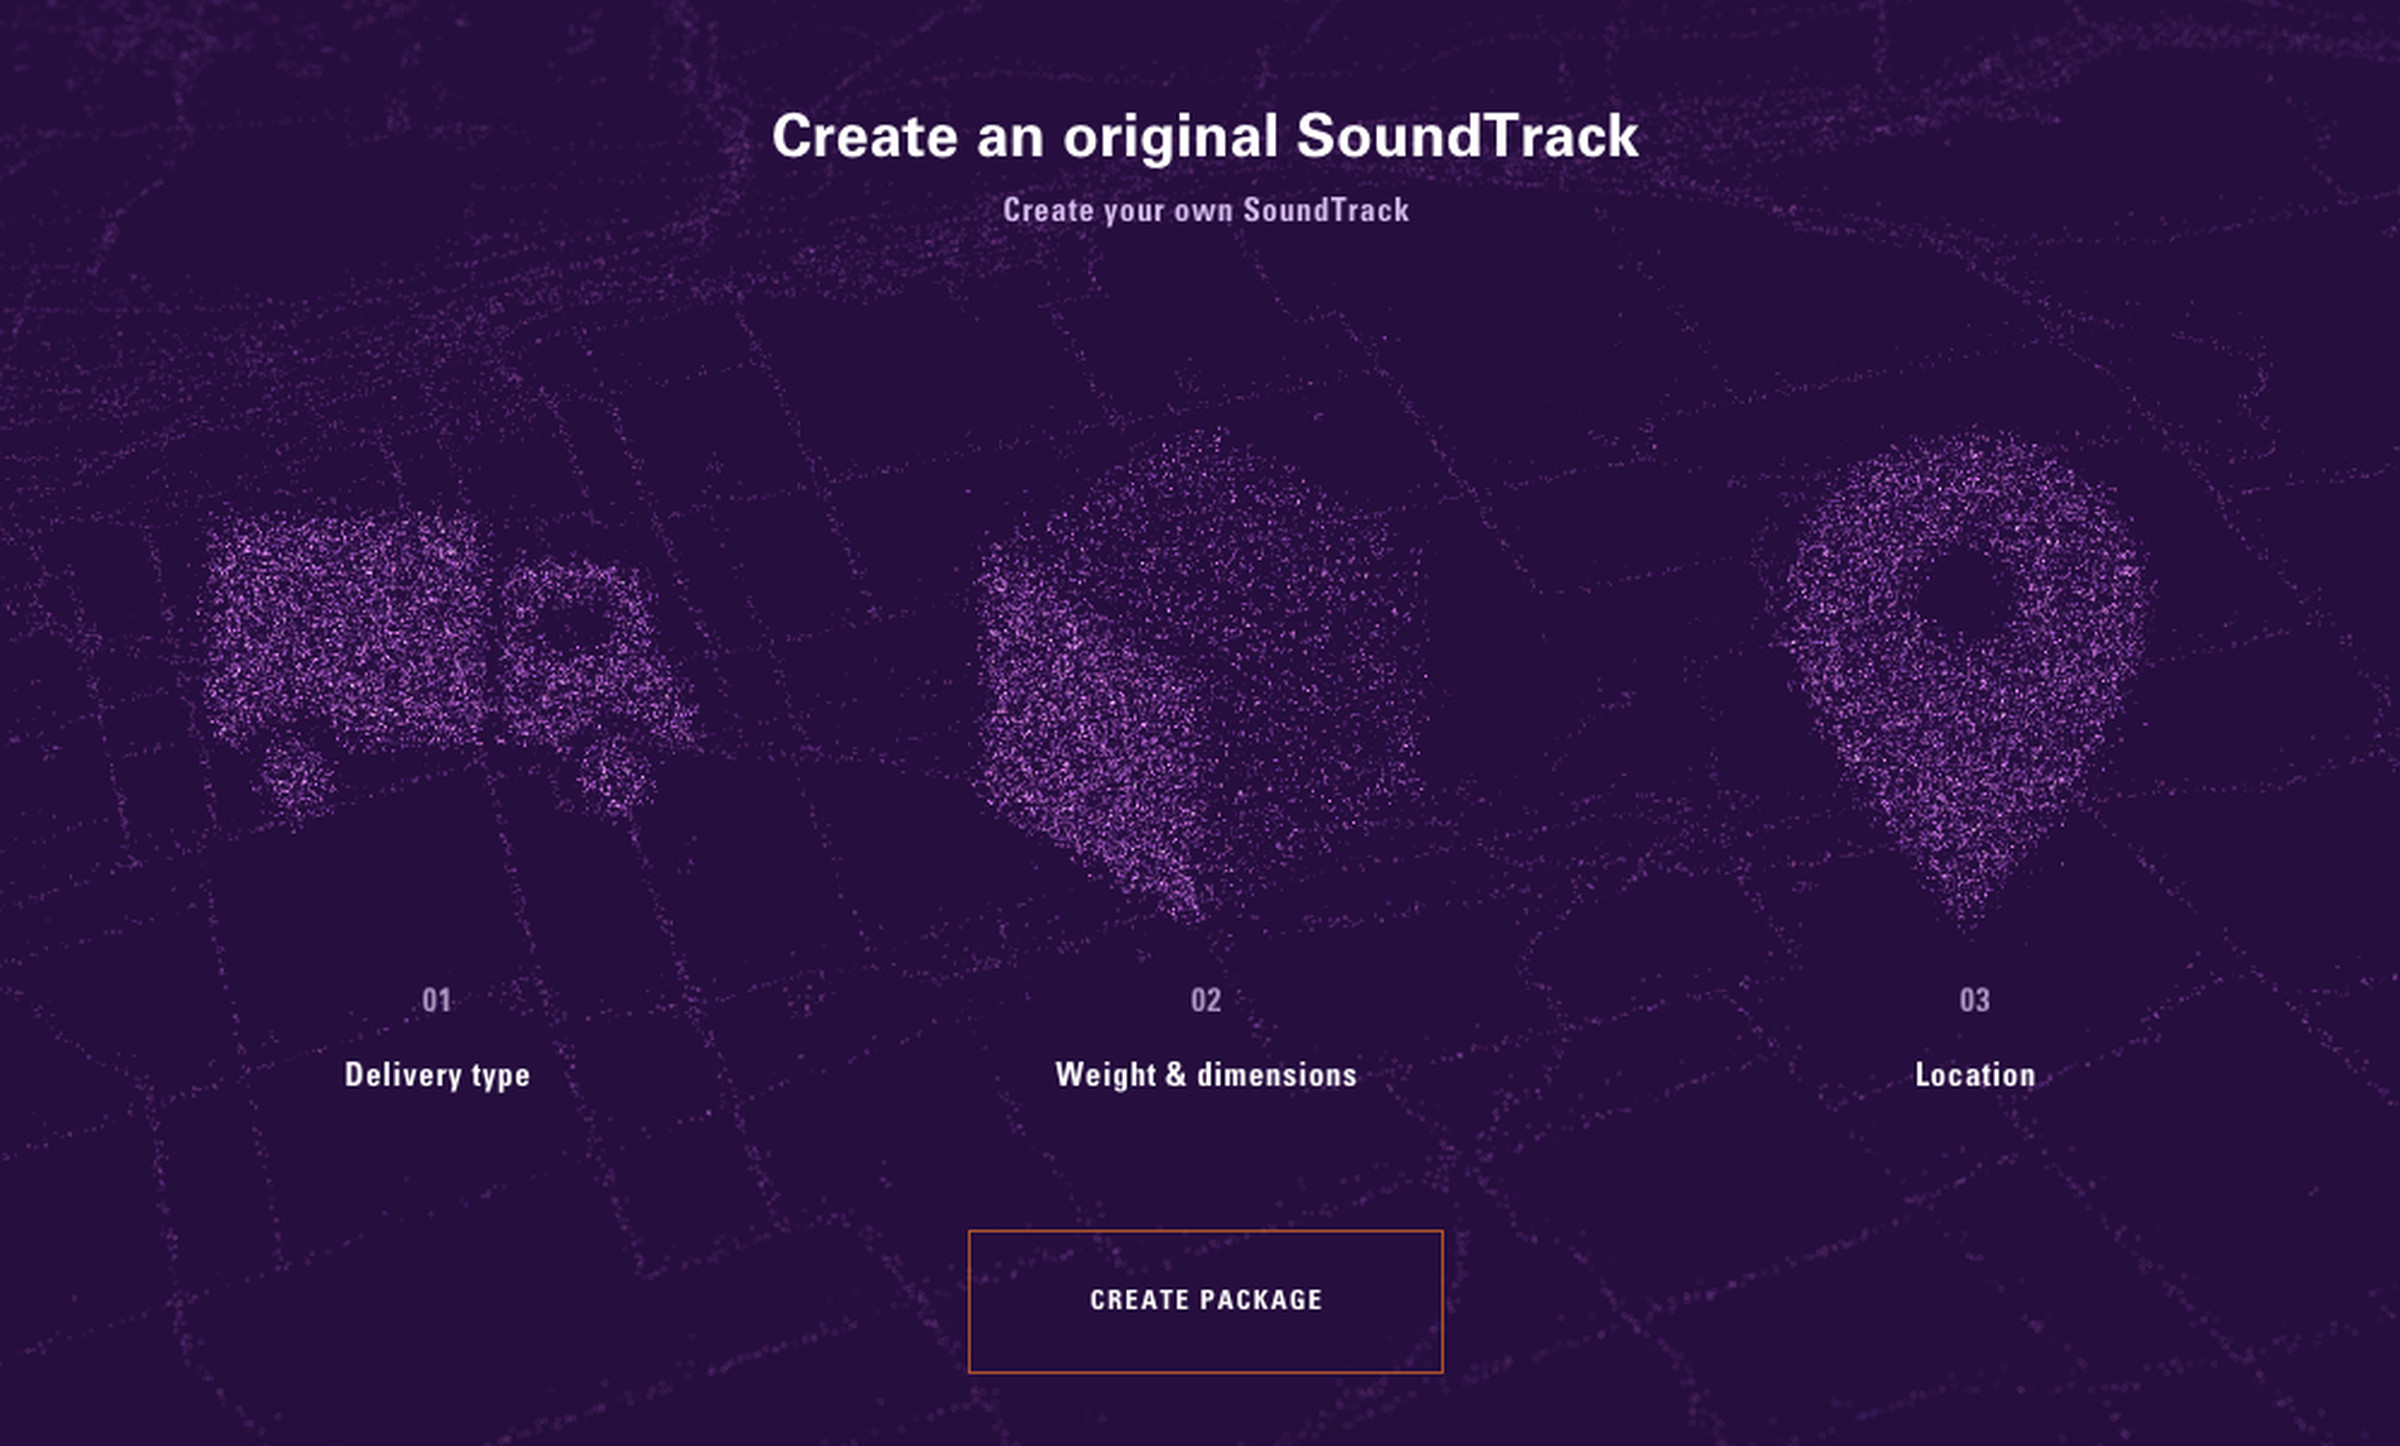 You can create your own soundtrack by imagining a fake FedEx delivery. Fun!